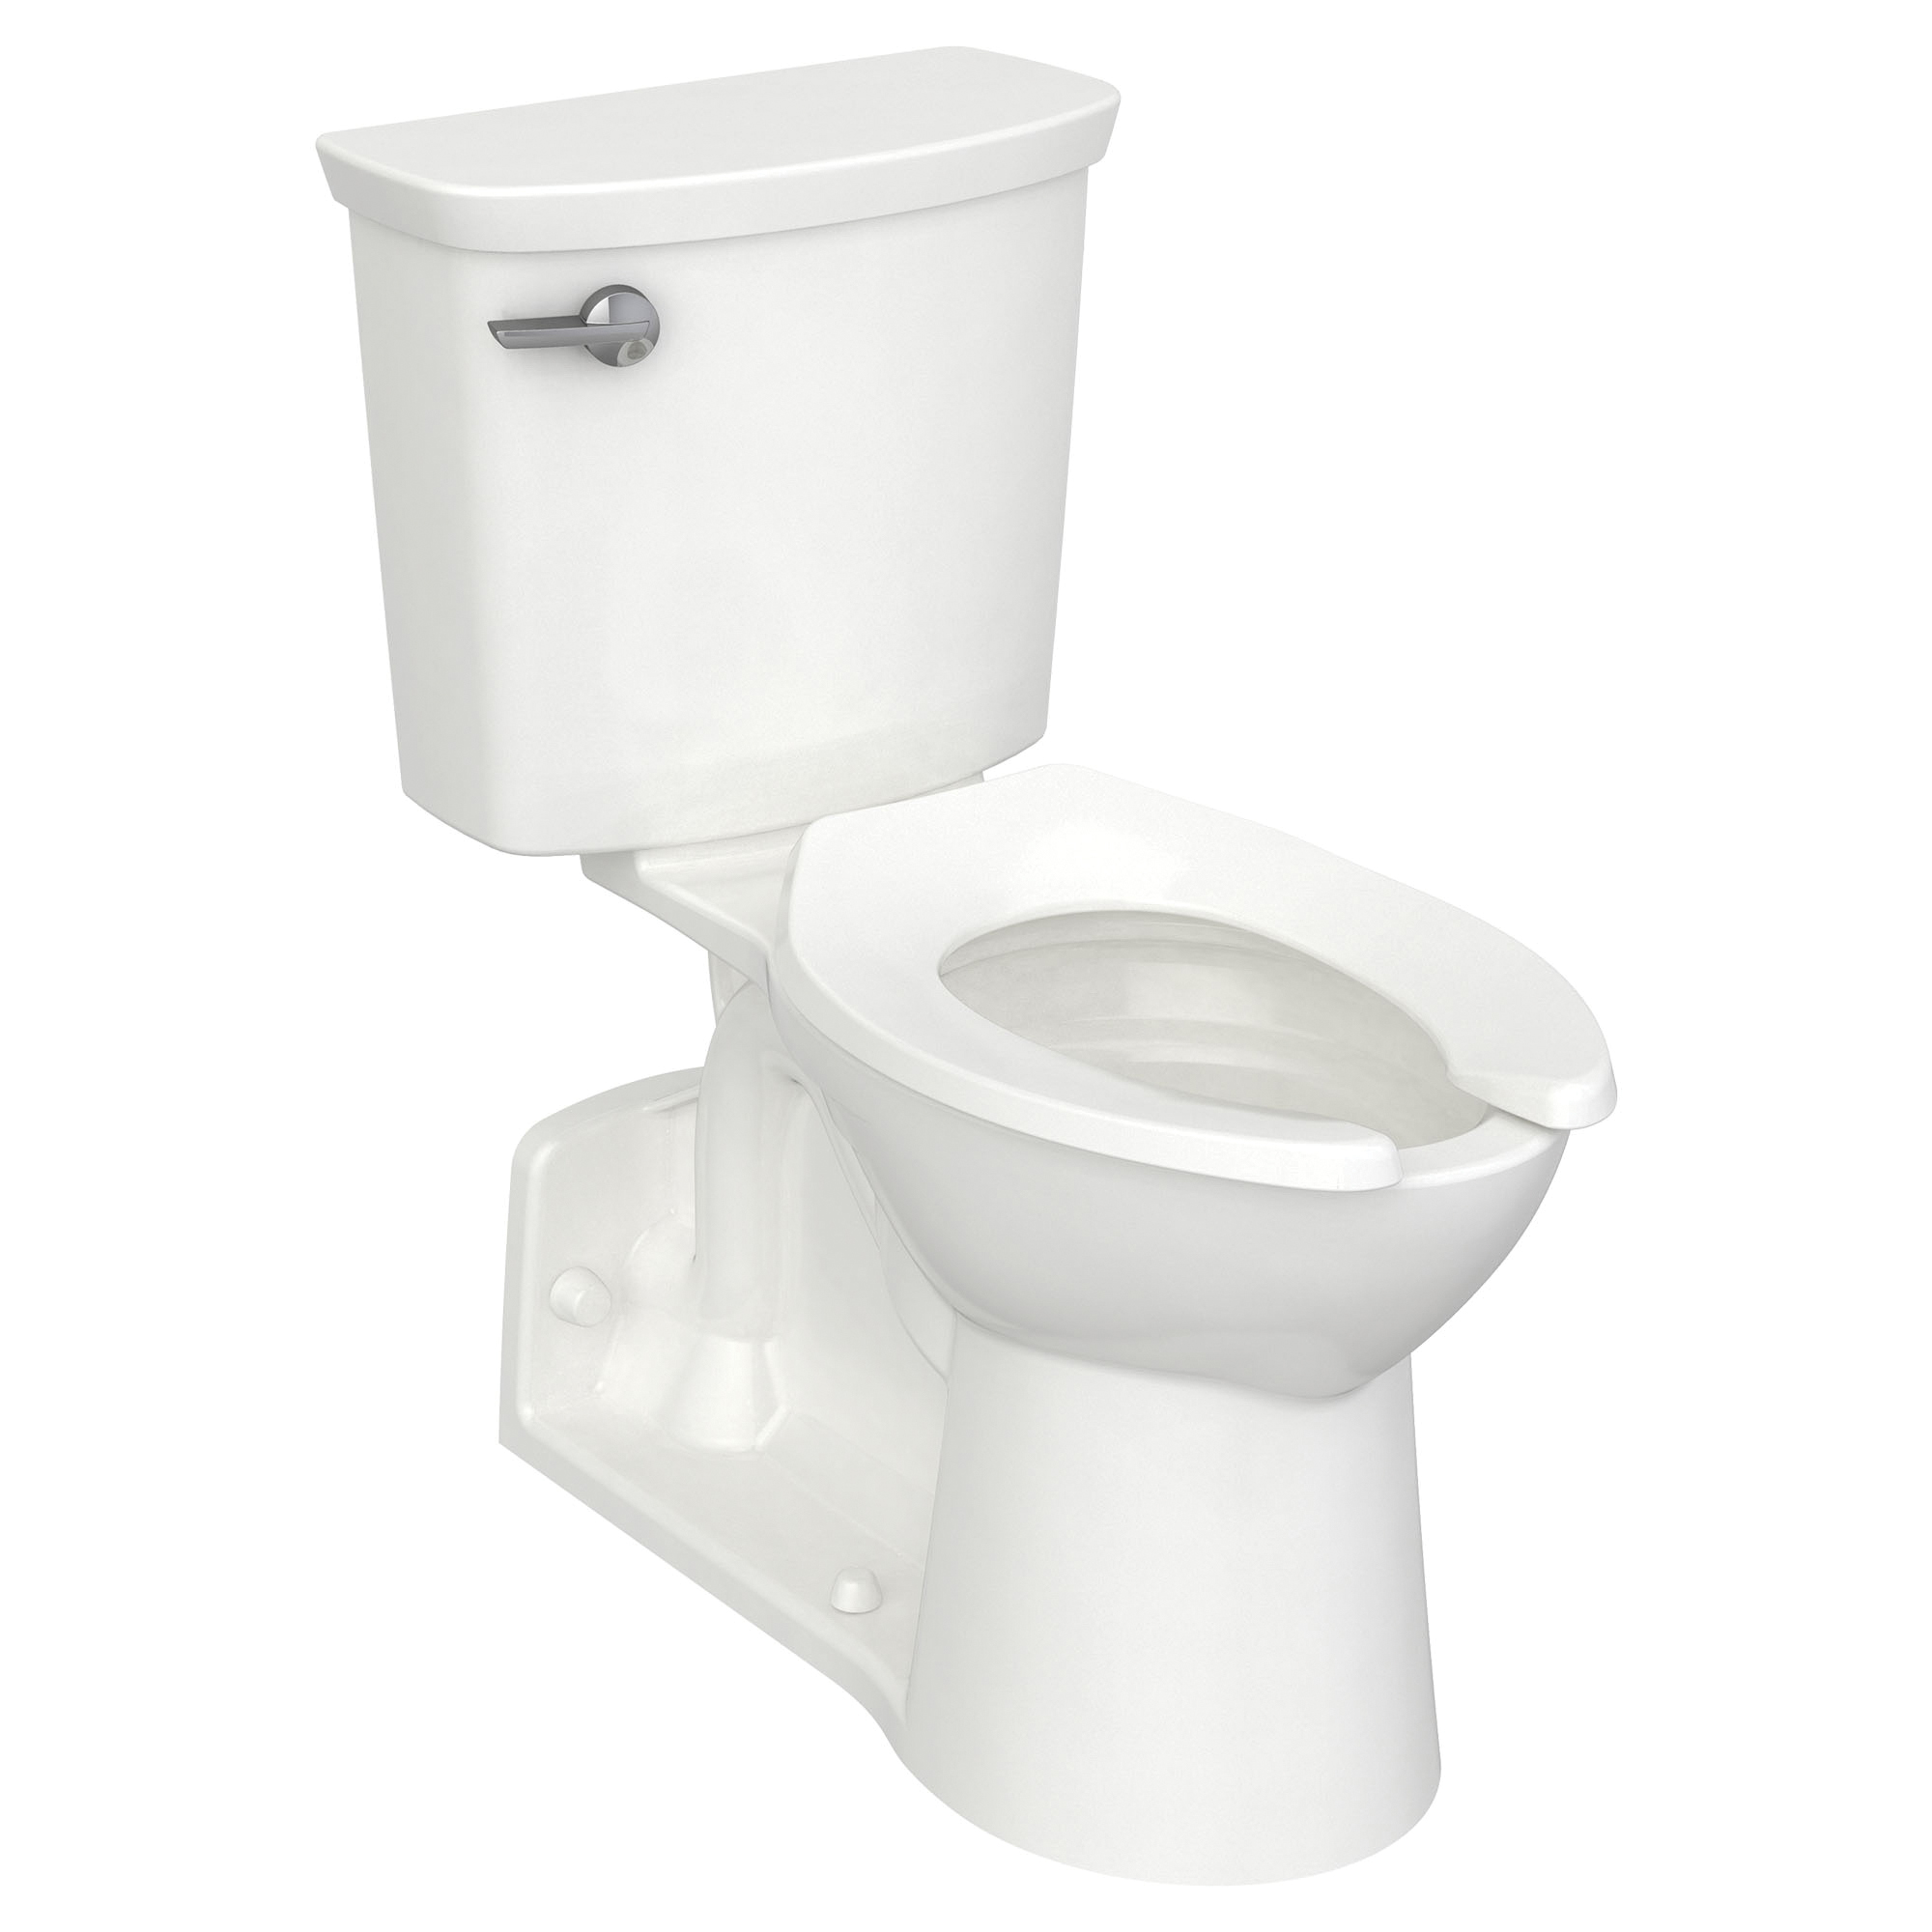 American Standard 5901100.020 Toilet Seat, Elongated Front Bowl, Open Front, Plastic, White, External Check Hinge, Import